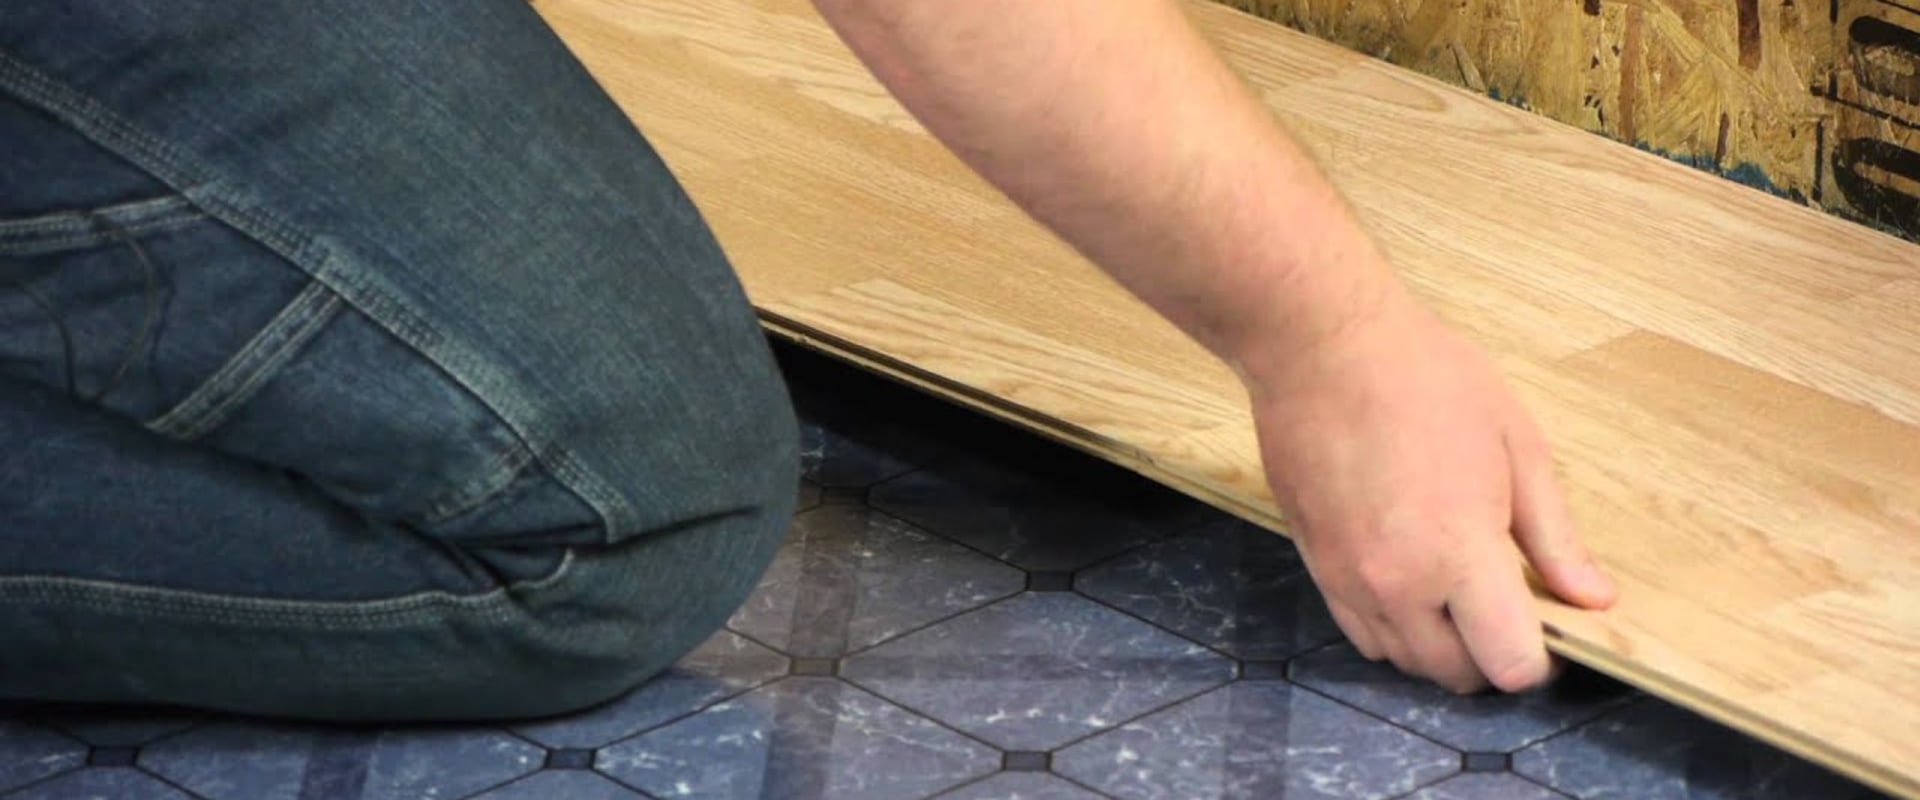 Can You Install New Flooring Over Old Flooring?